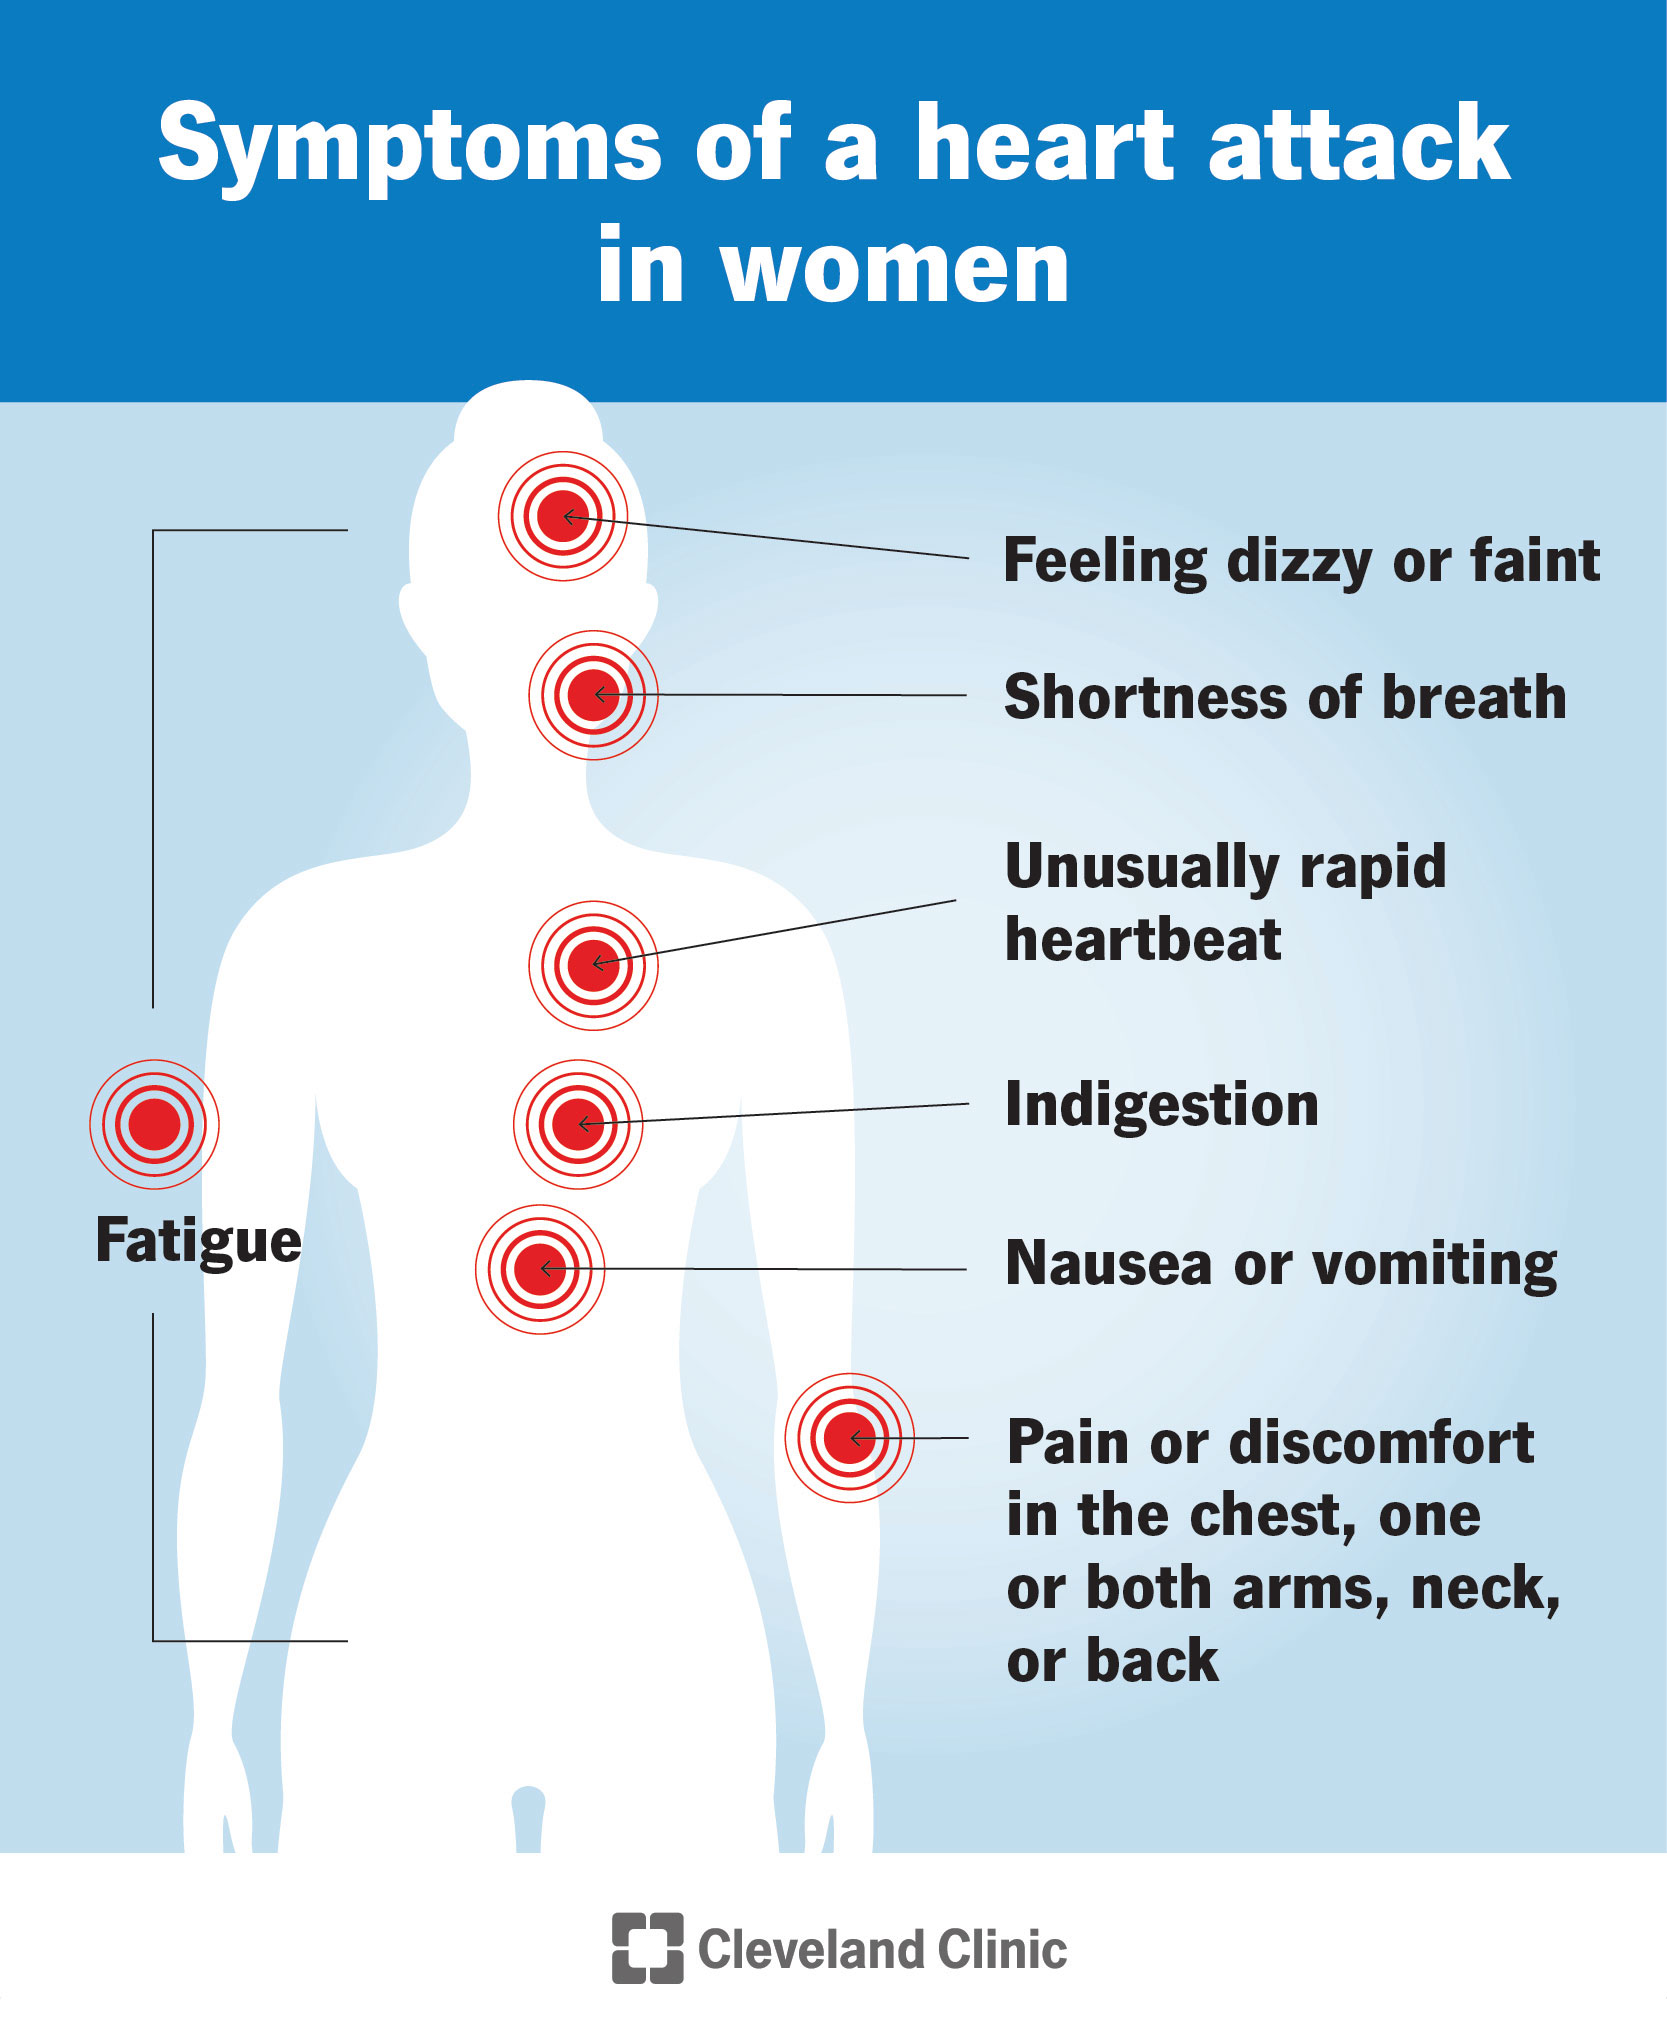 Symptoms of heart attacks in women include nausea, fatigue, rapid heartbeat and more.